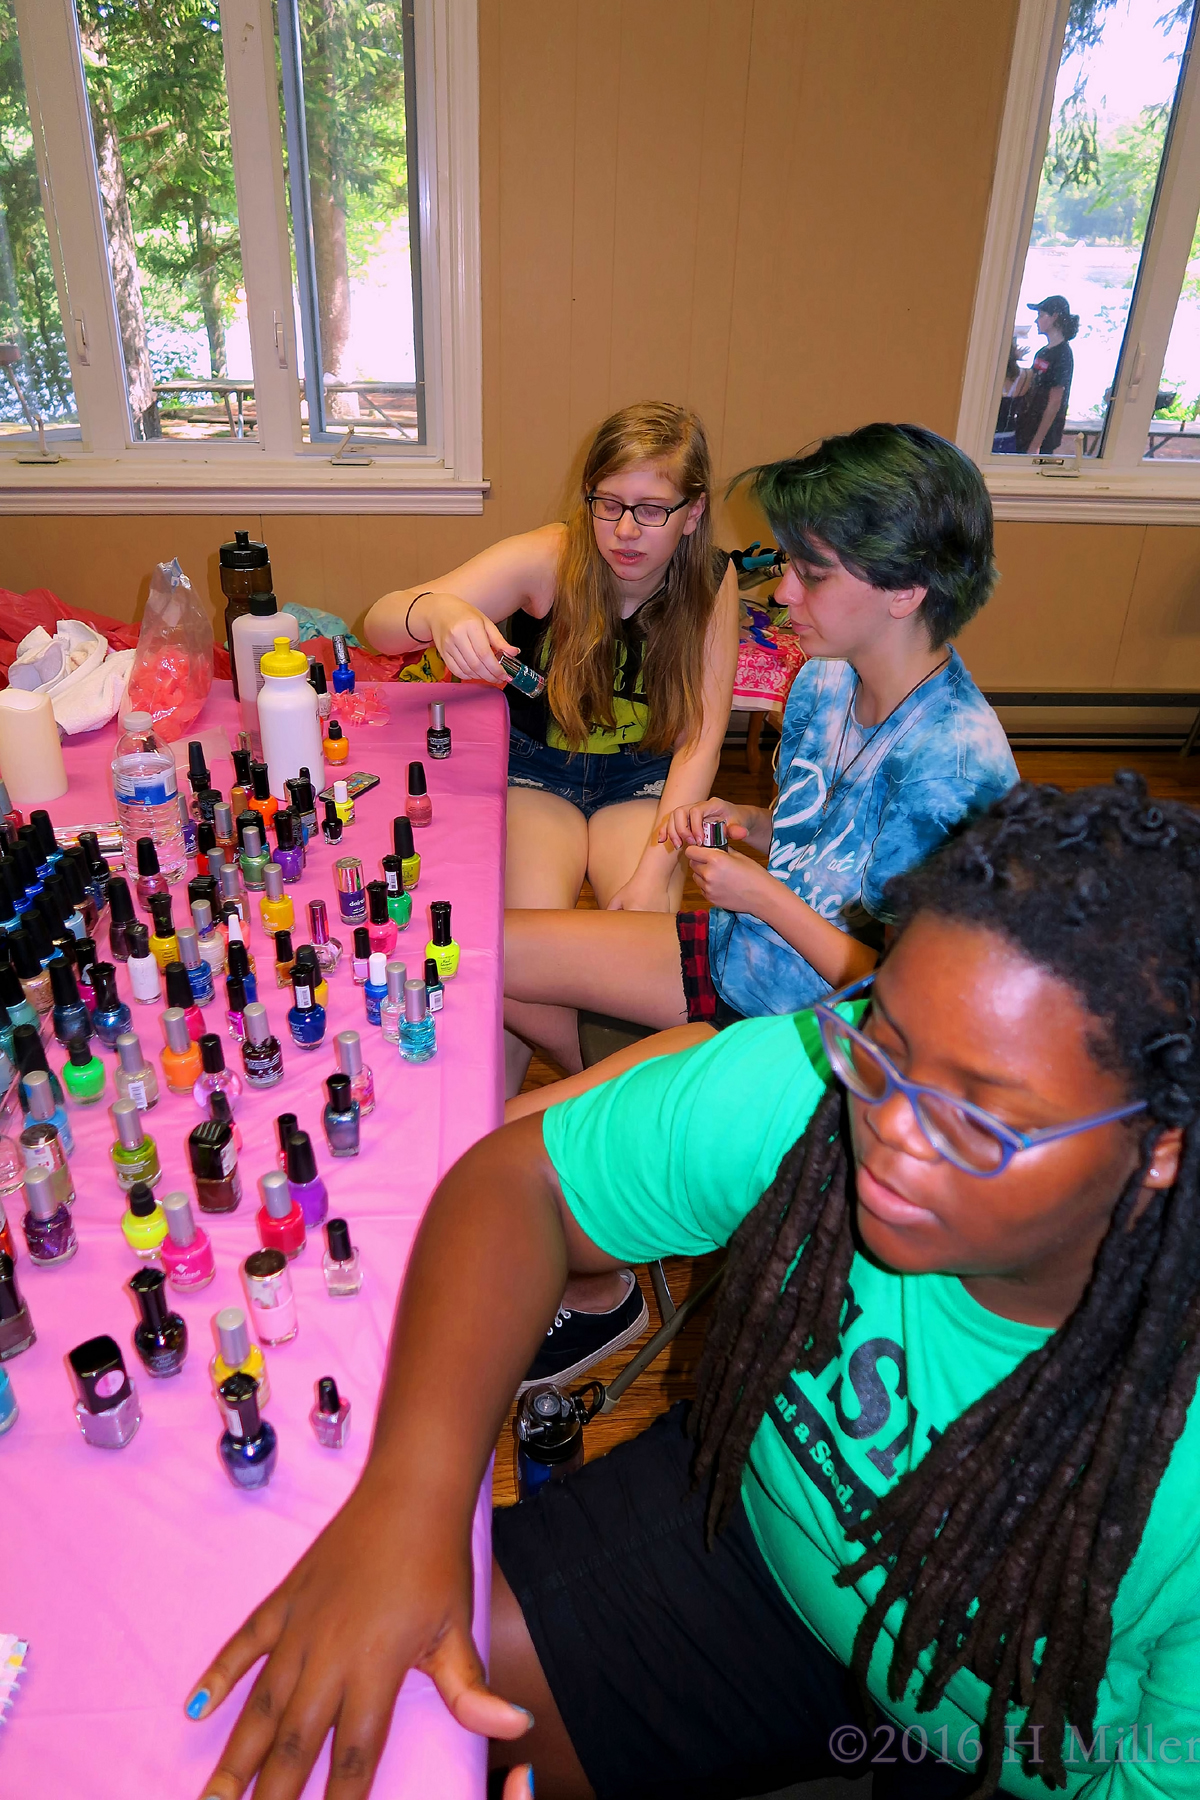 Getting Manicures Done At The Girls Spa! 